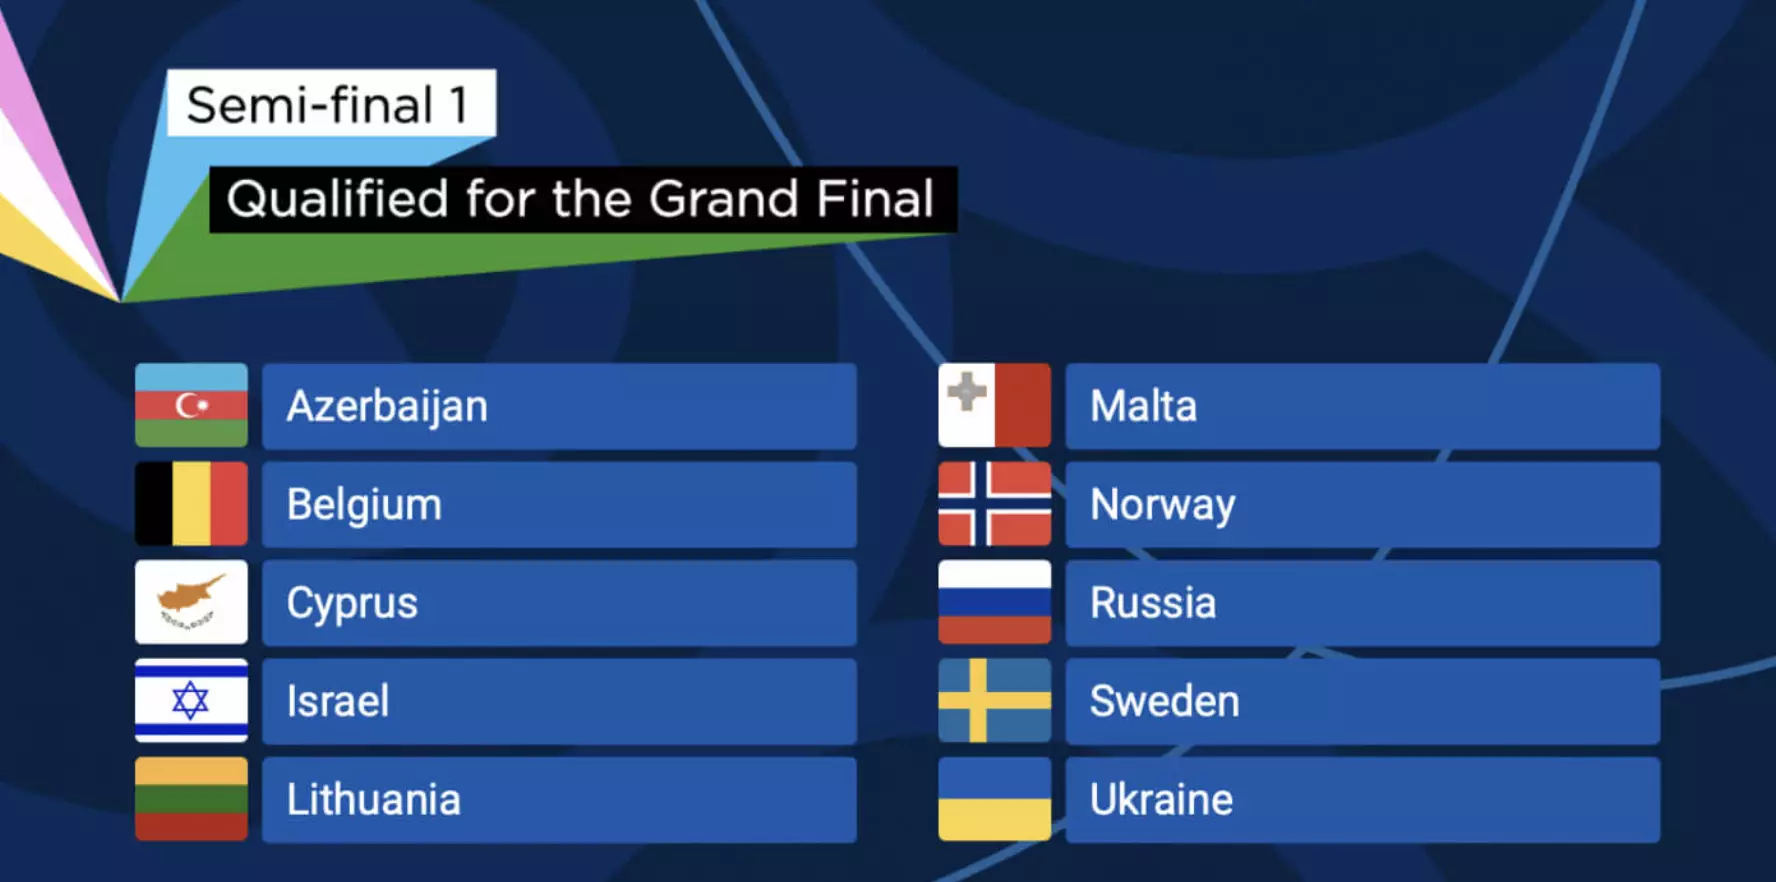 The first semi-final saw ten countries go through to Saturday's final